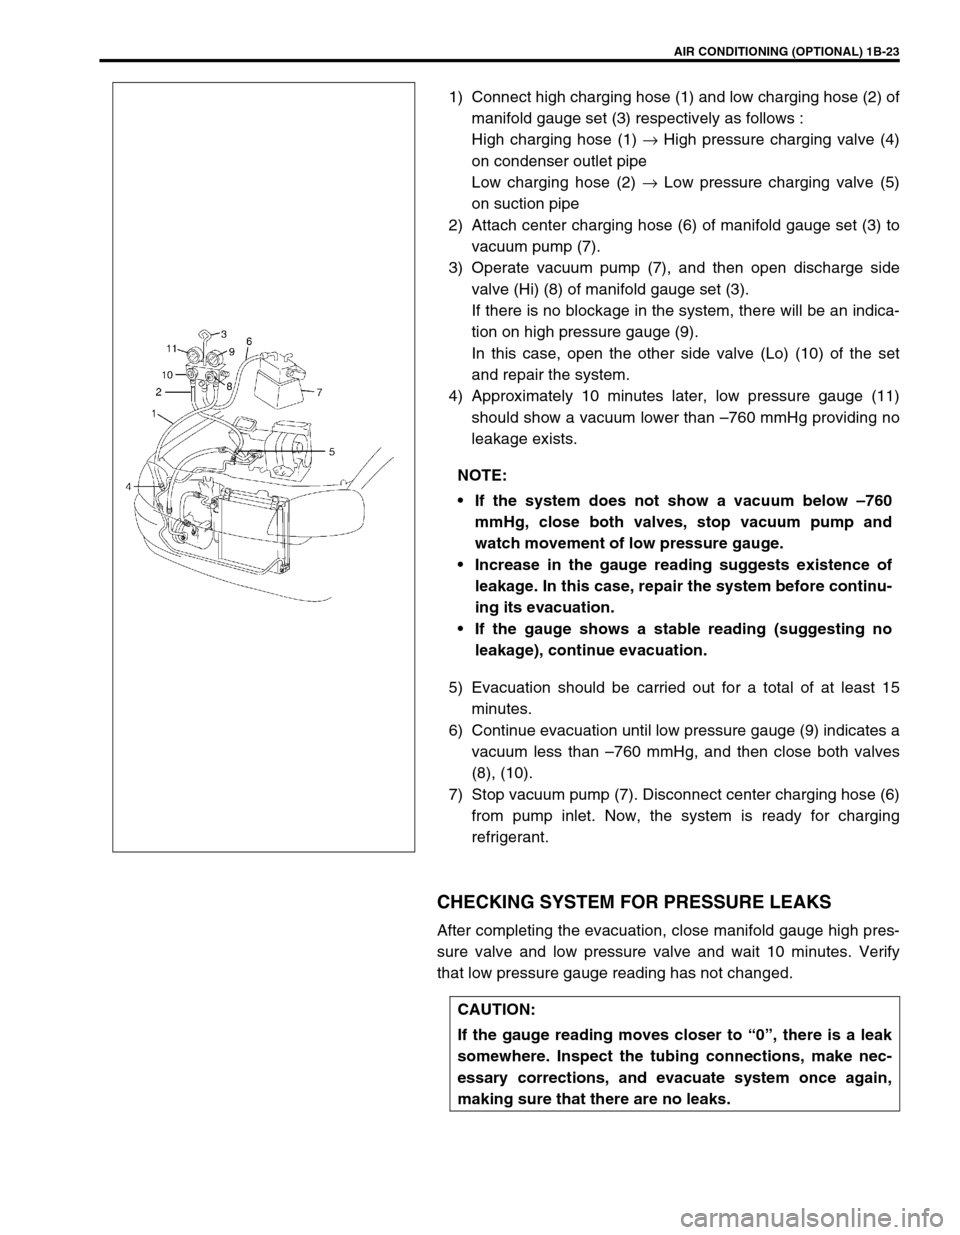 SUZUKI SWIFT 2000 1.G RG413 Service Workshop Manual AIR CONDITIONING (OPTIONAL) 1B-23
1) Connect high charging hose (1) and low charging hose (2) of
manifold gauge set (3) respectively as follows : 
High charging hose (1) → High pressure charging val